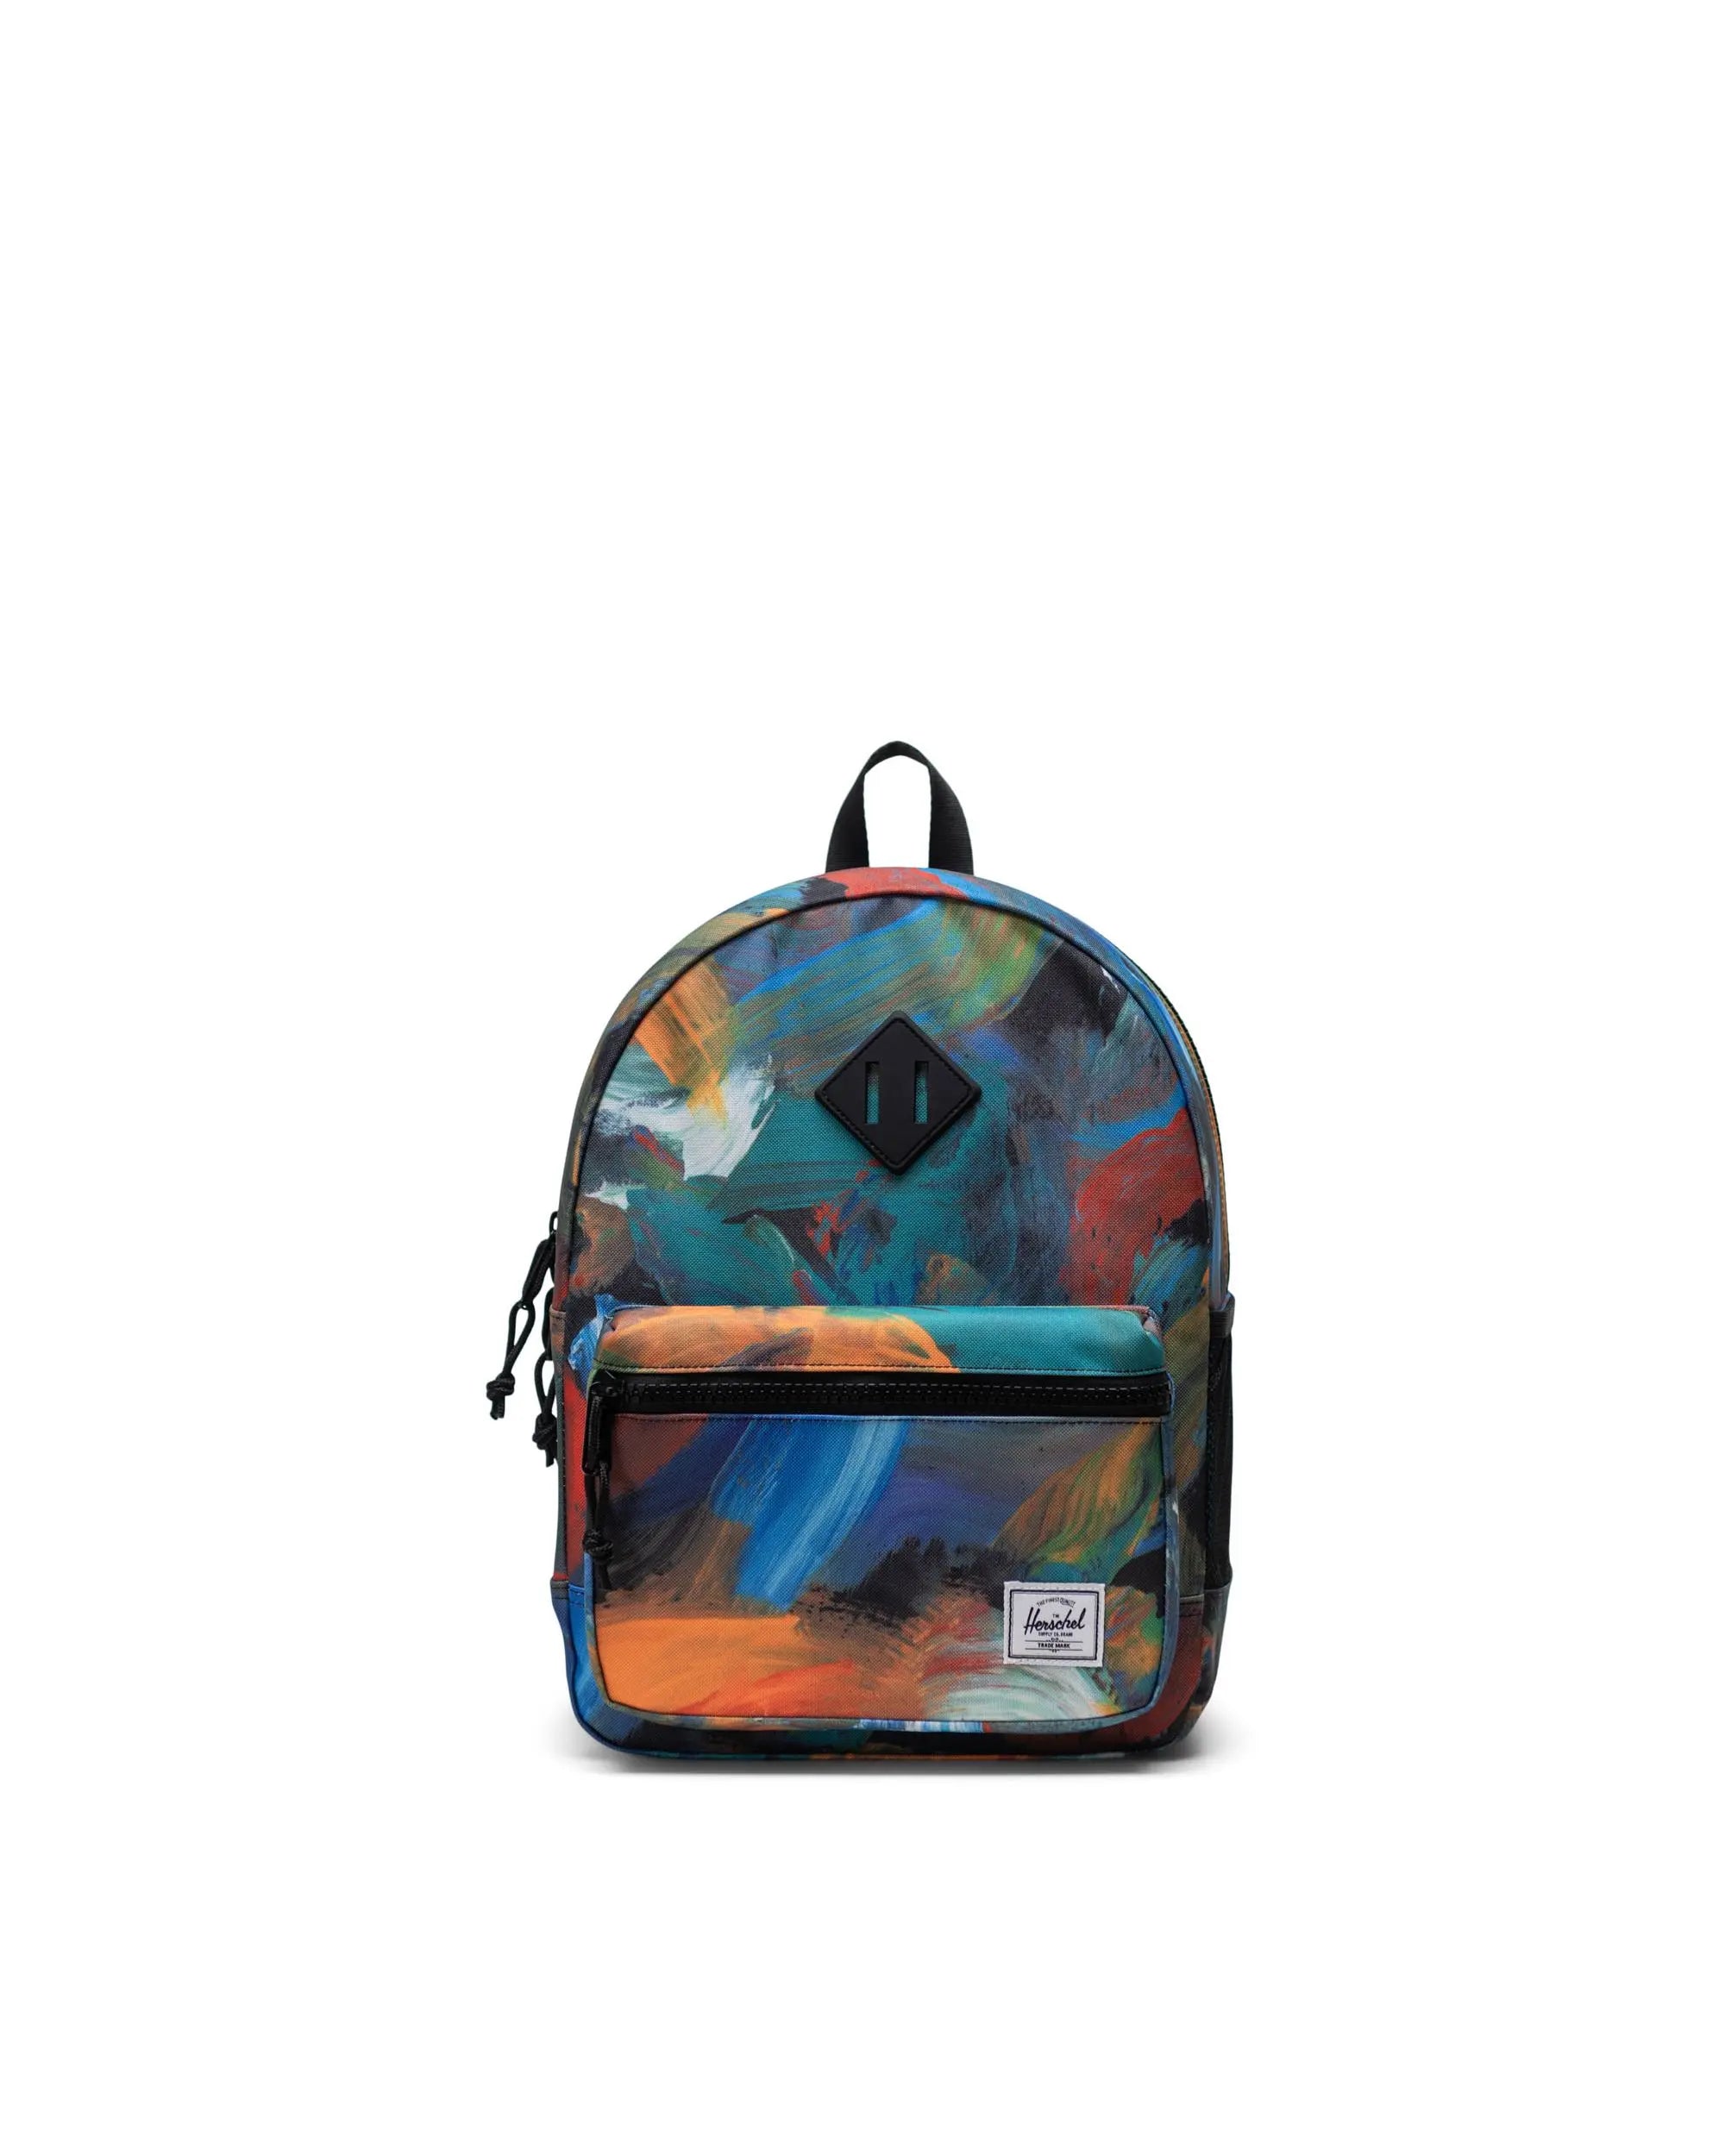 Paint Palette Youth Backpack Heritage Herschel Heritage Youth Backpack Paint Palette